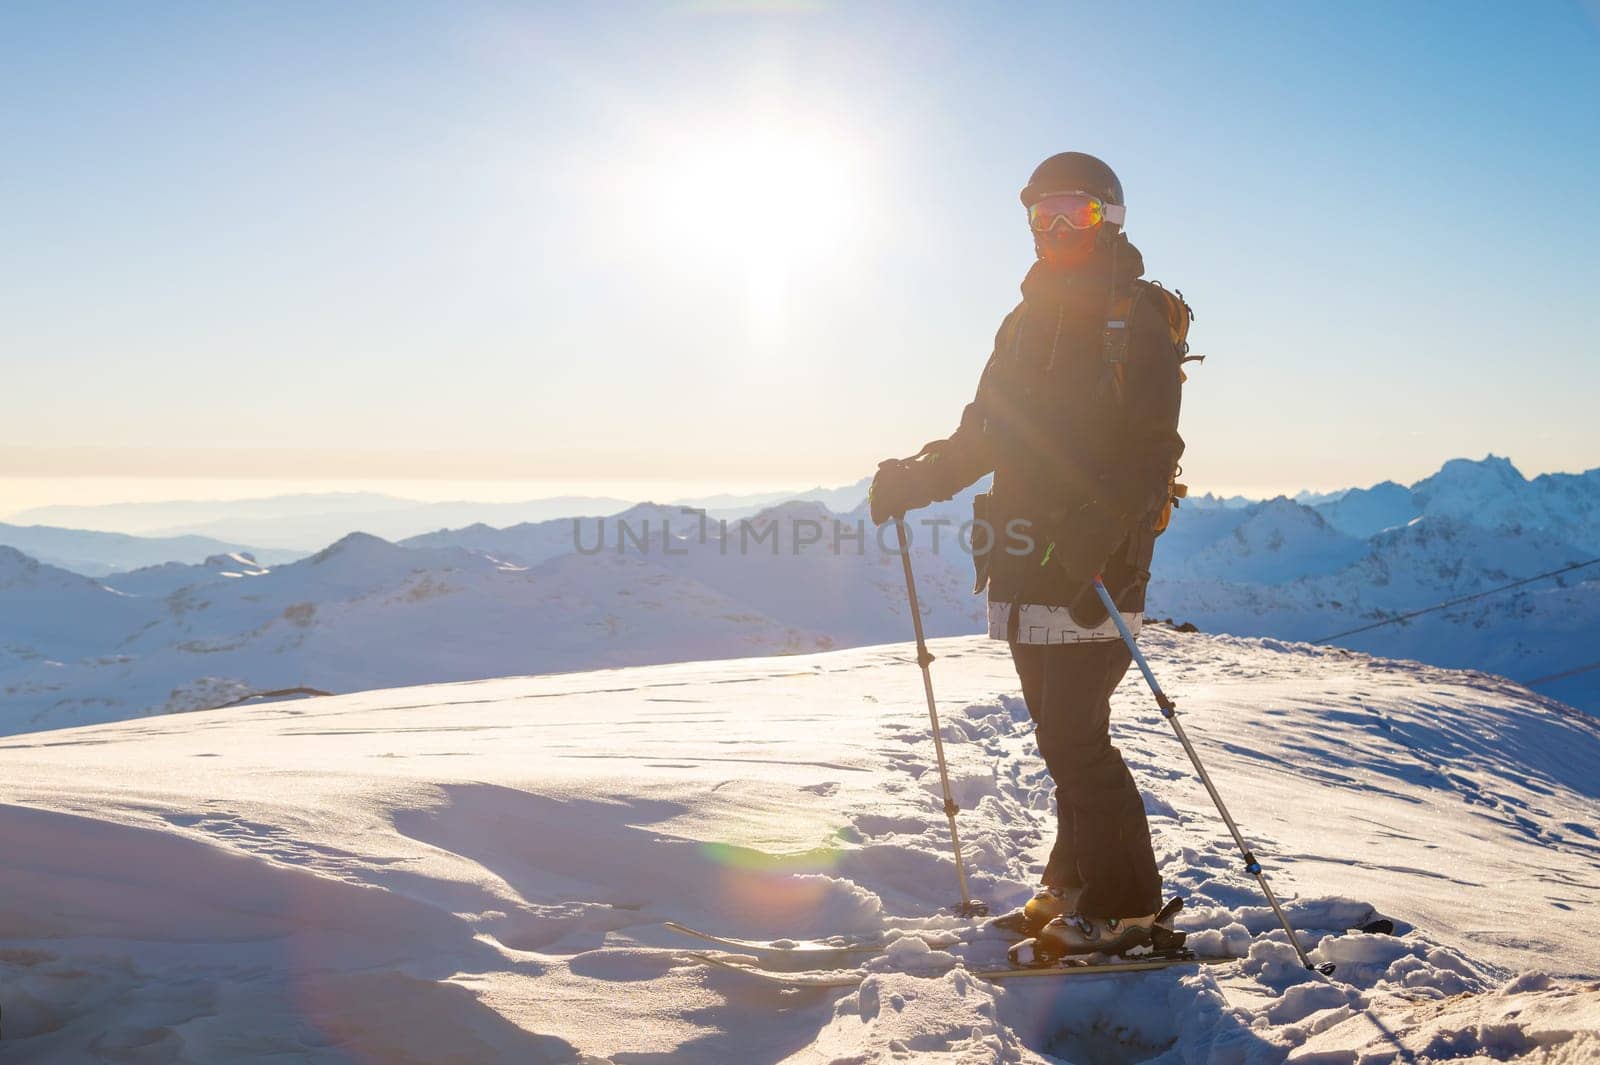 An adult girl on skis stands on a mountainside, admiring the mountain landscape, looking at the camera and enjoying the sunny winter weather. Interesting winter activity. side view.